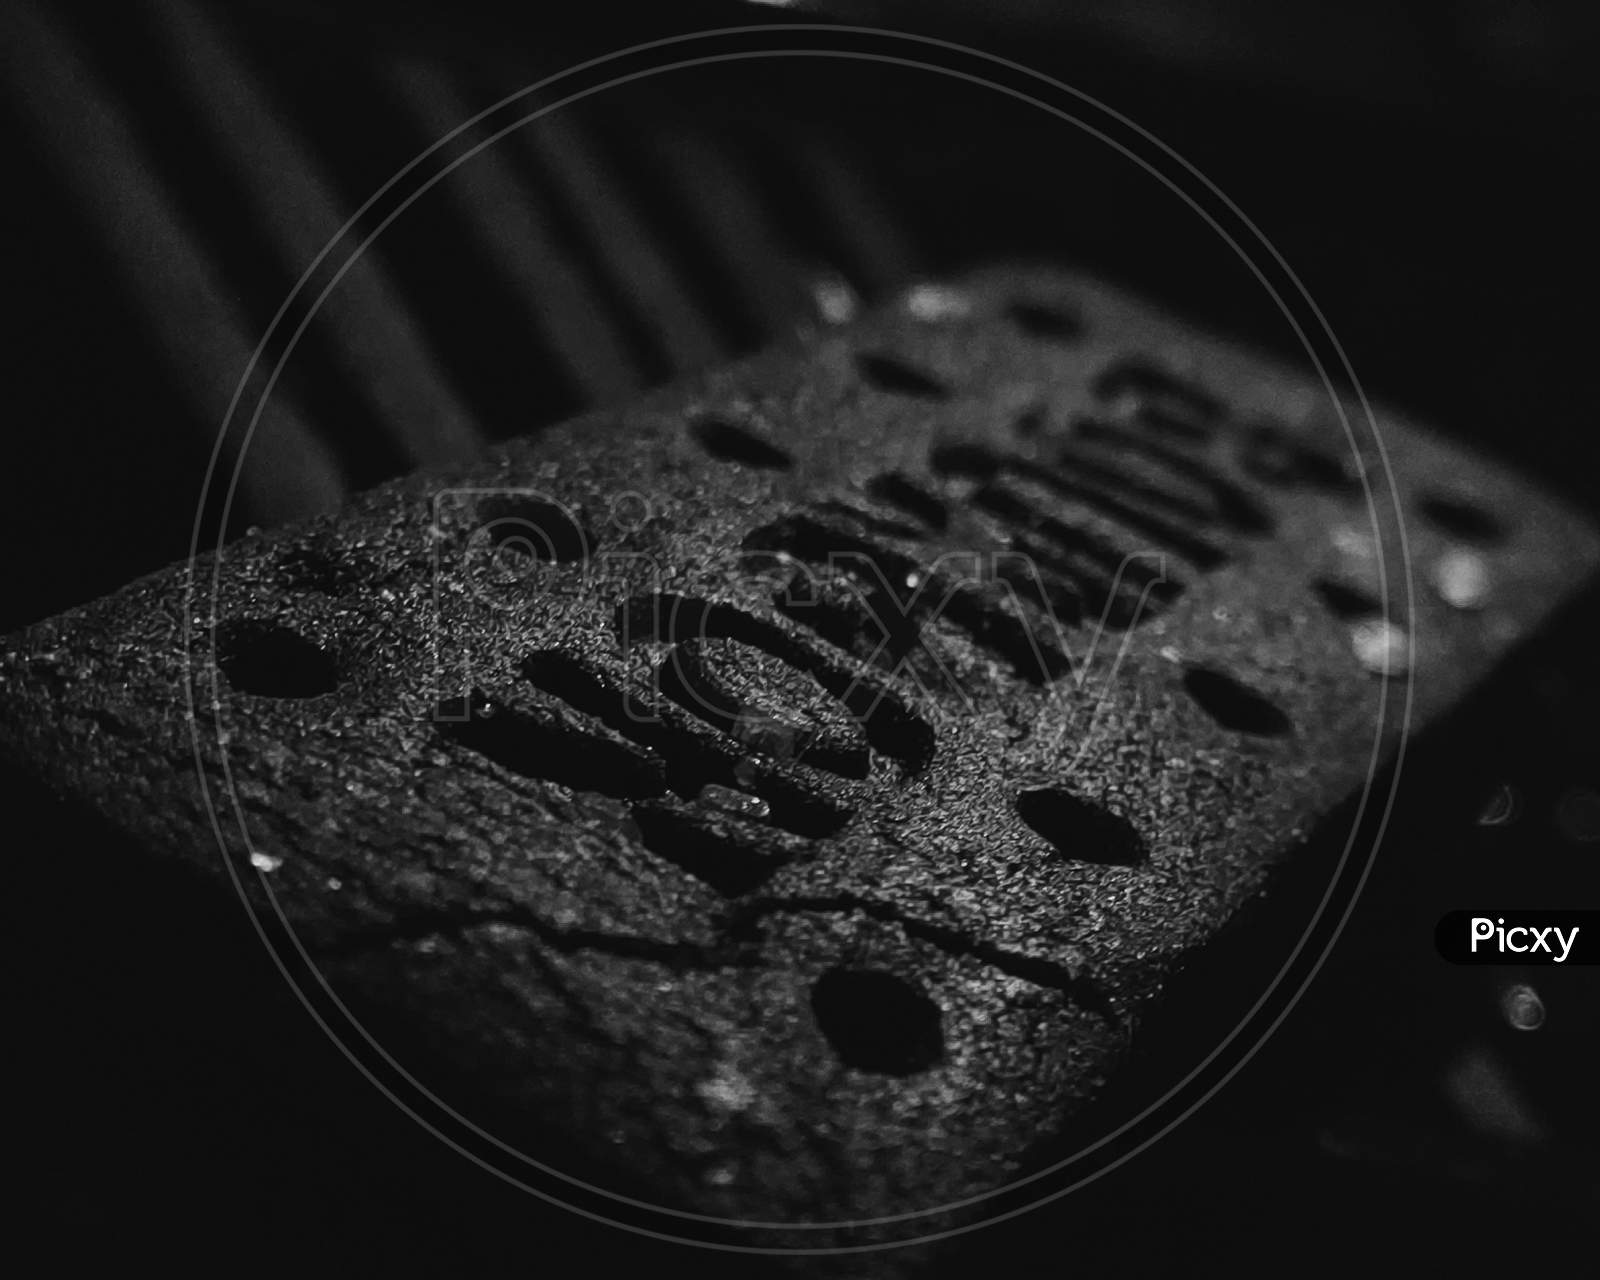 Bourbon biscuit photography